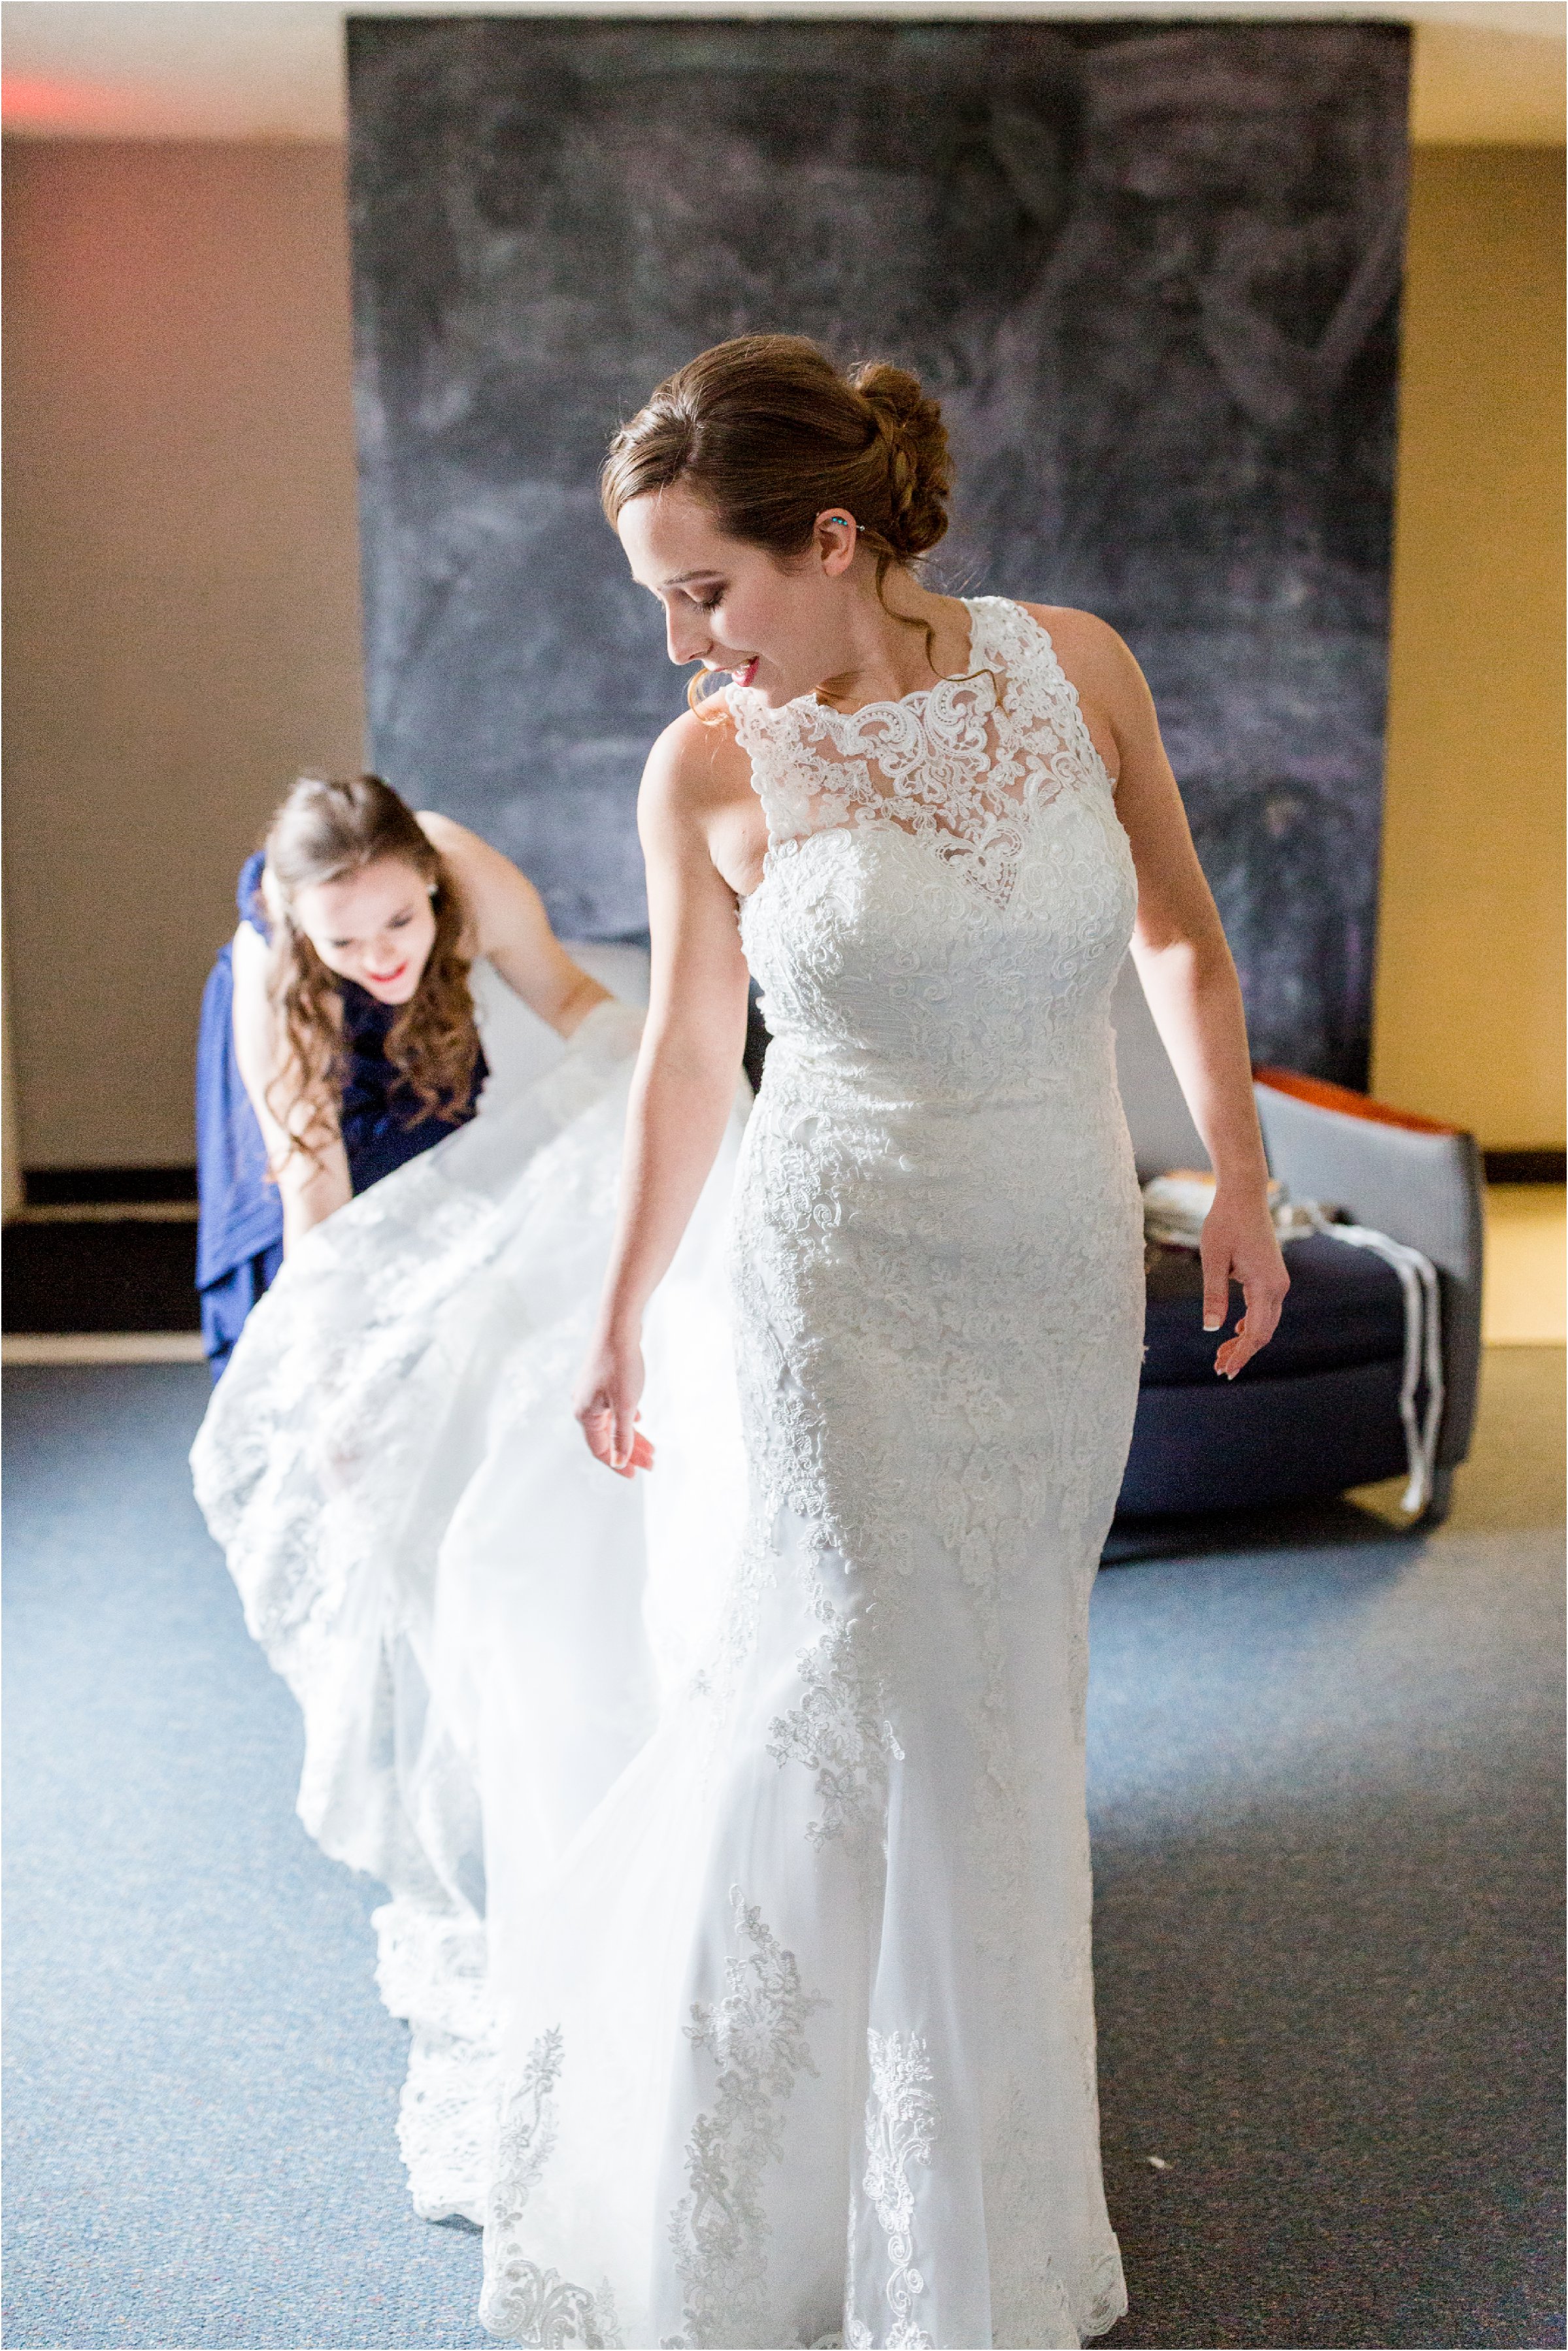 bride is helped into wedding dress by bridesmaids who button and her in and help with jewelry